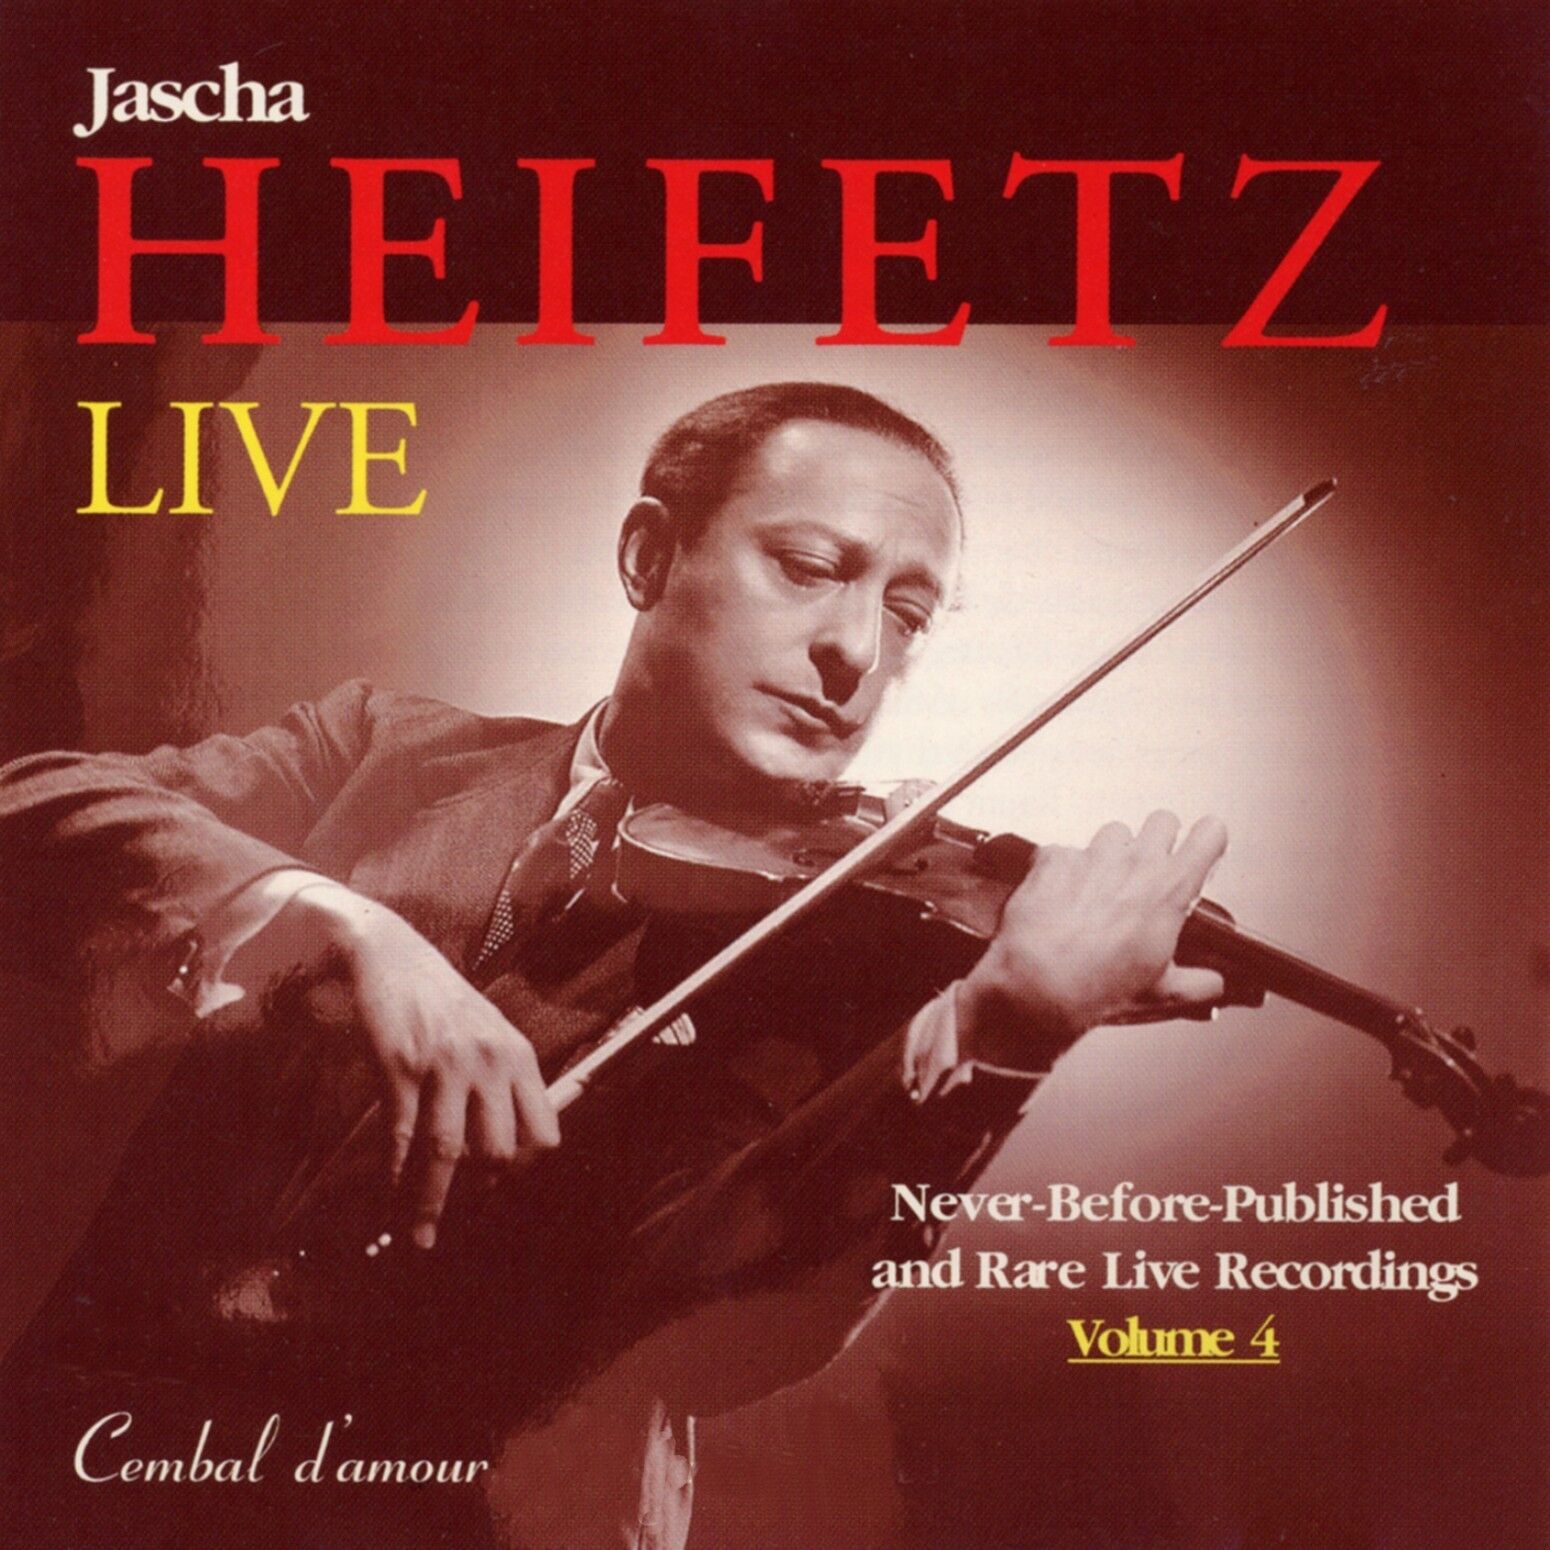 Jascha Heifetz in Never-Before-Published and Rare LIVE RECORDINGS,  Volume 4